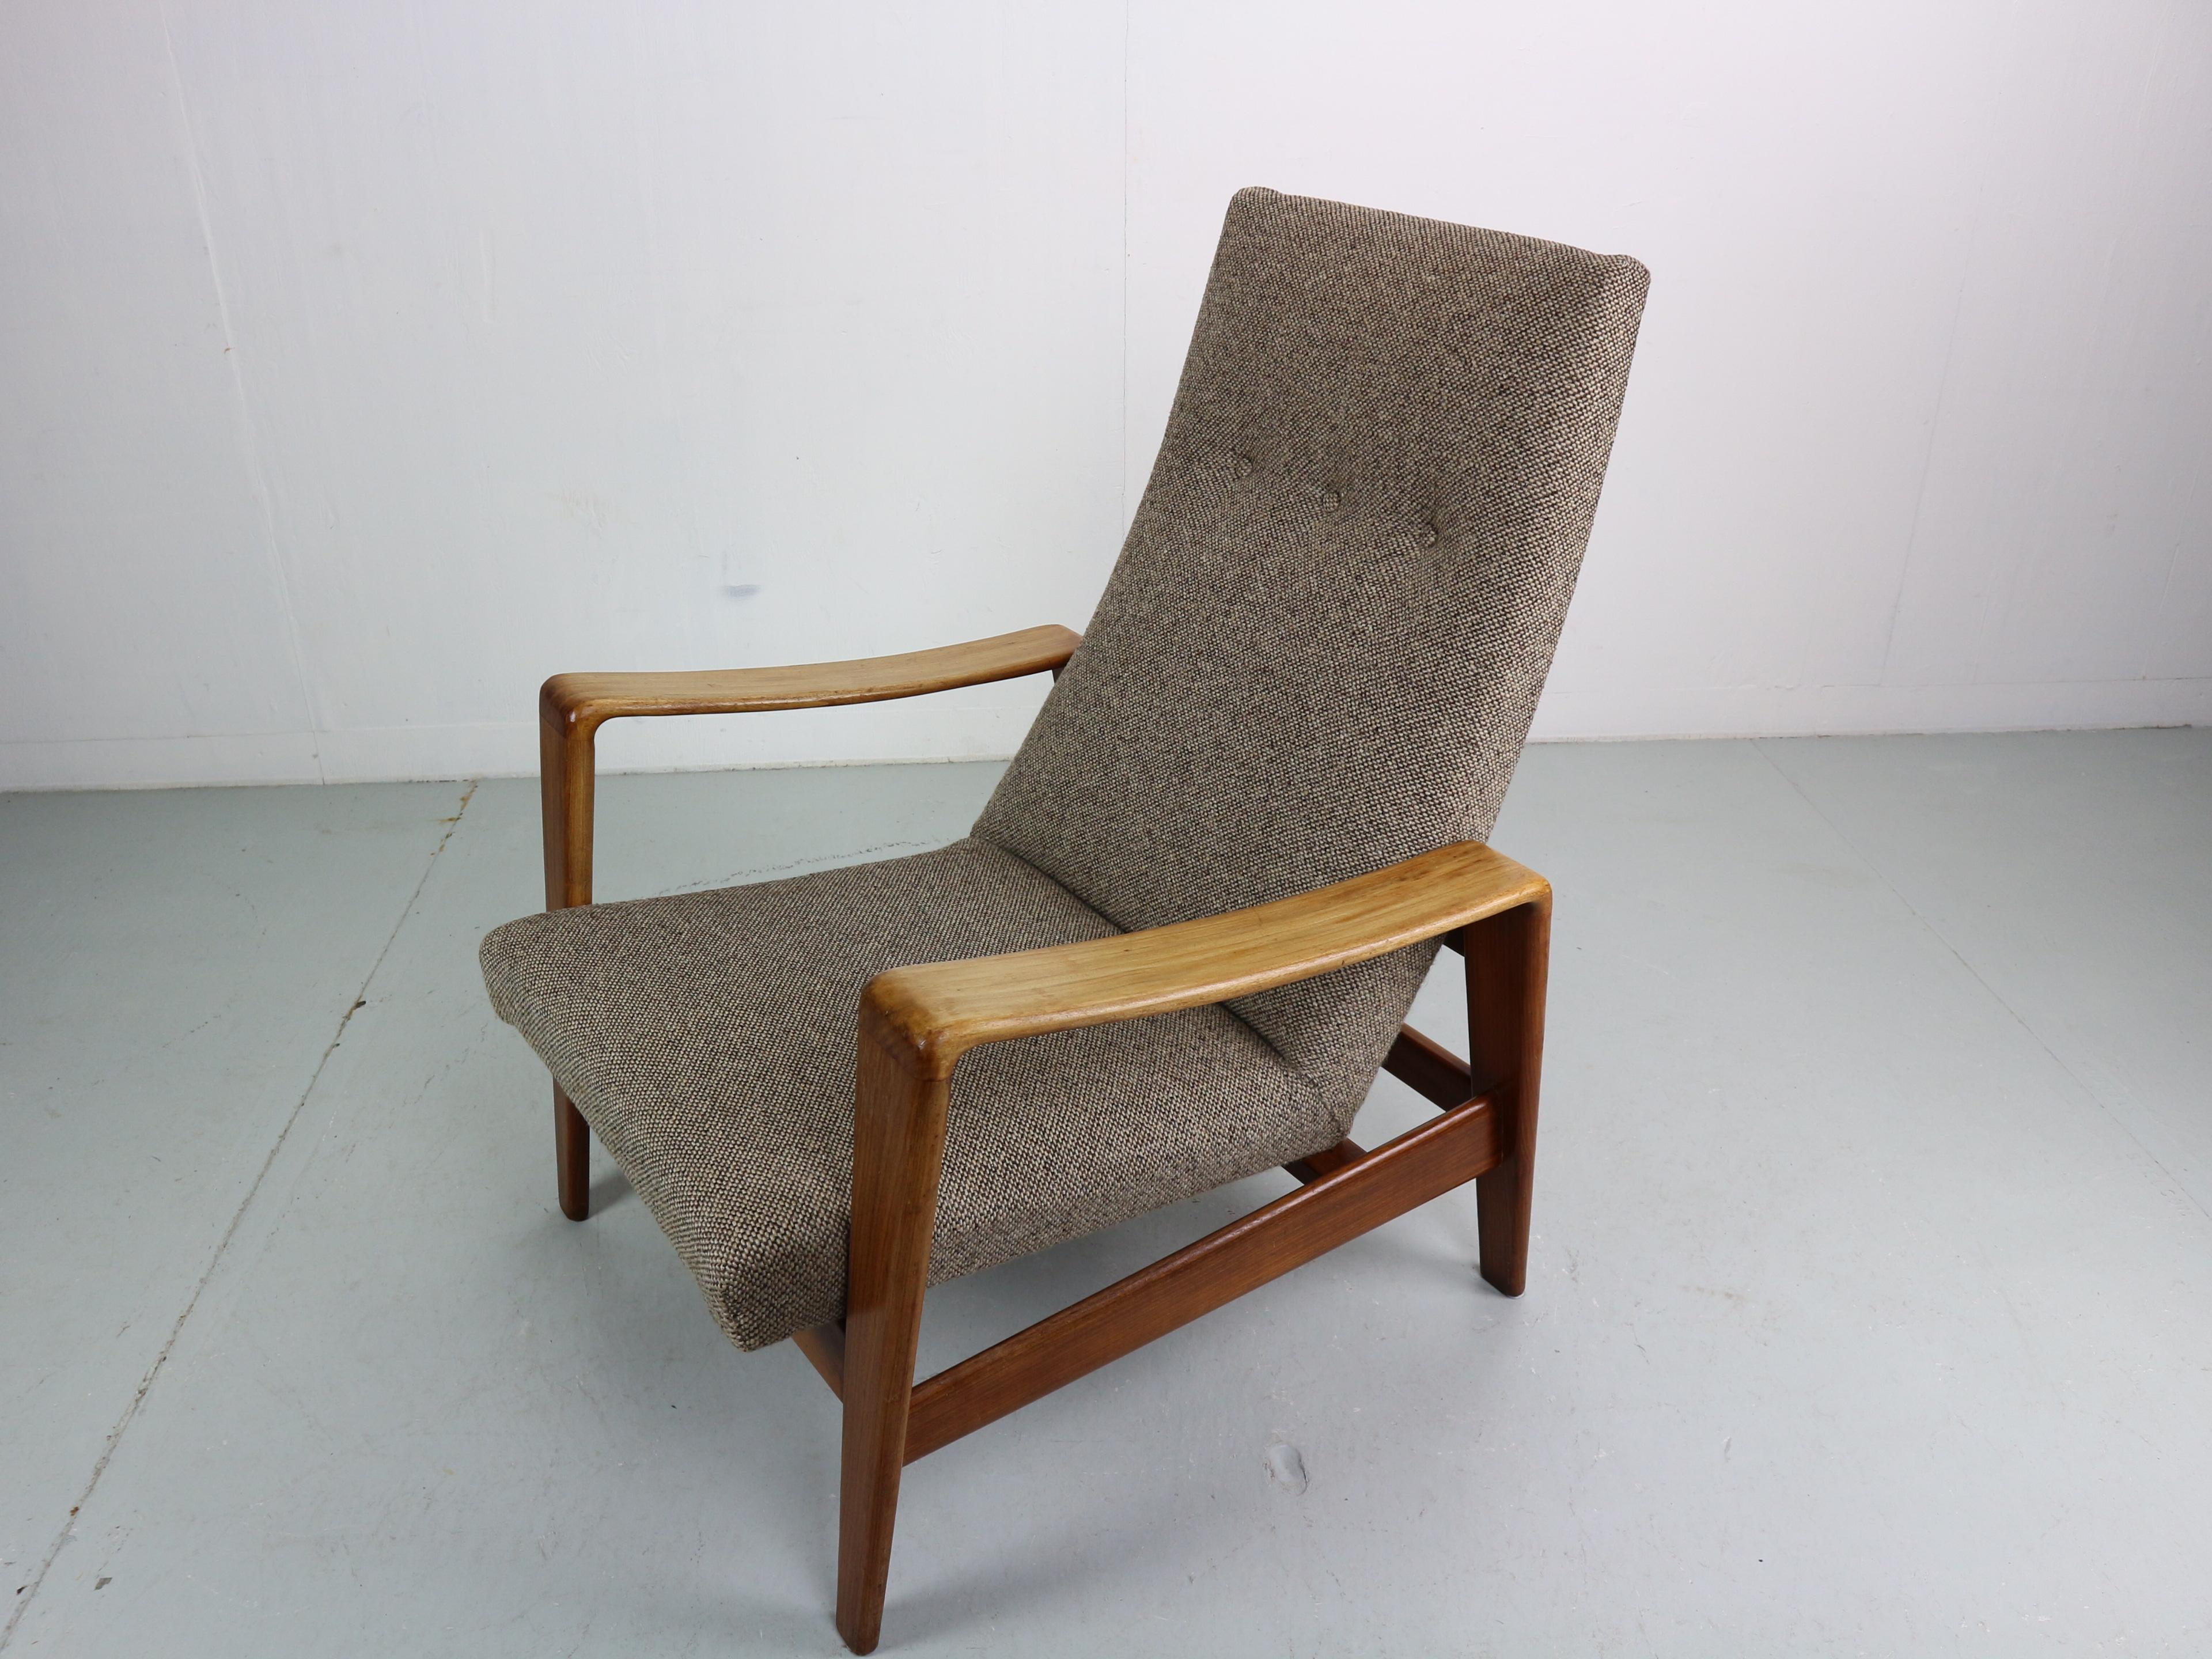 Lounge Chair by Arne Wahl Iversen for Komfort, 1960s For Sale 12